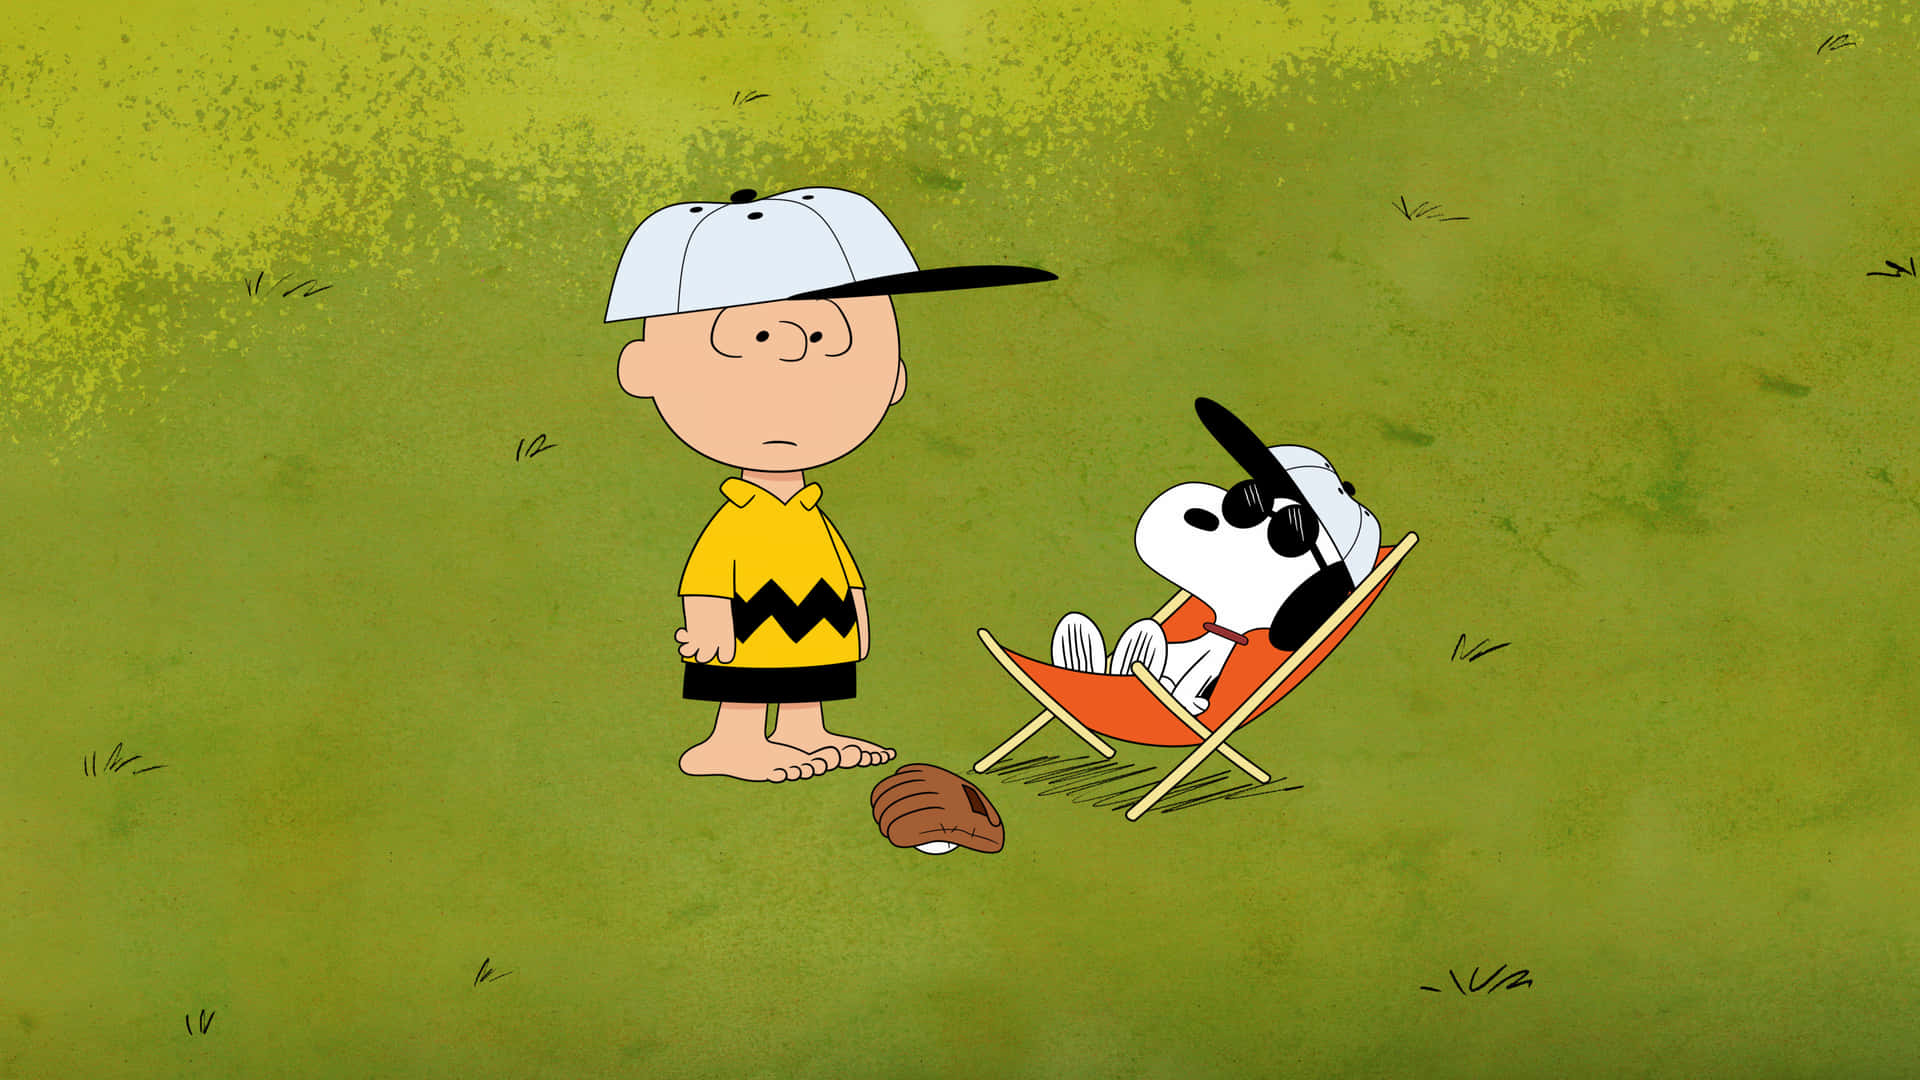 Too cool for school: Snoopy strikes a chill pose.